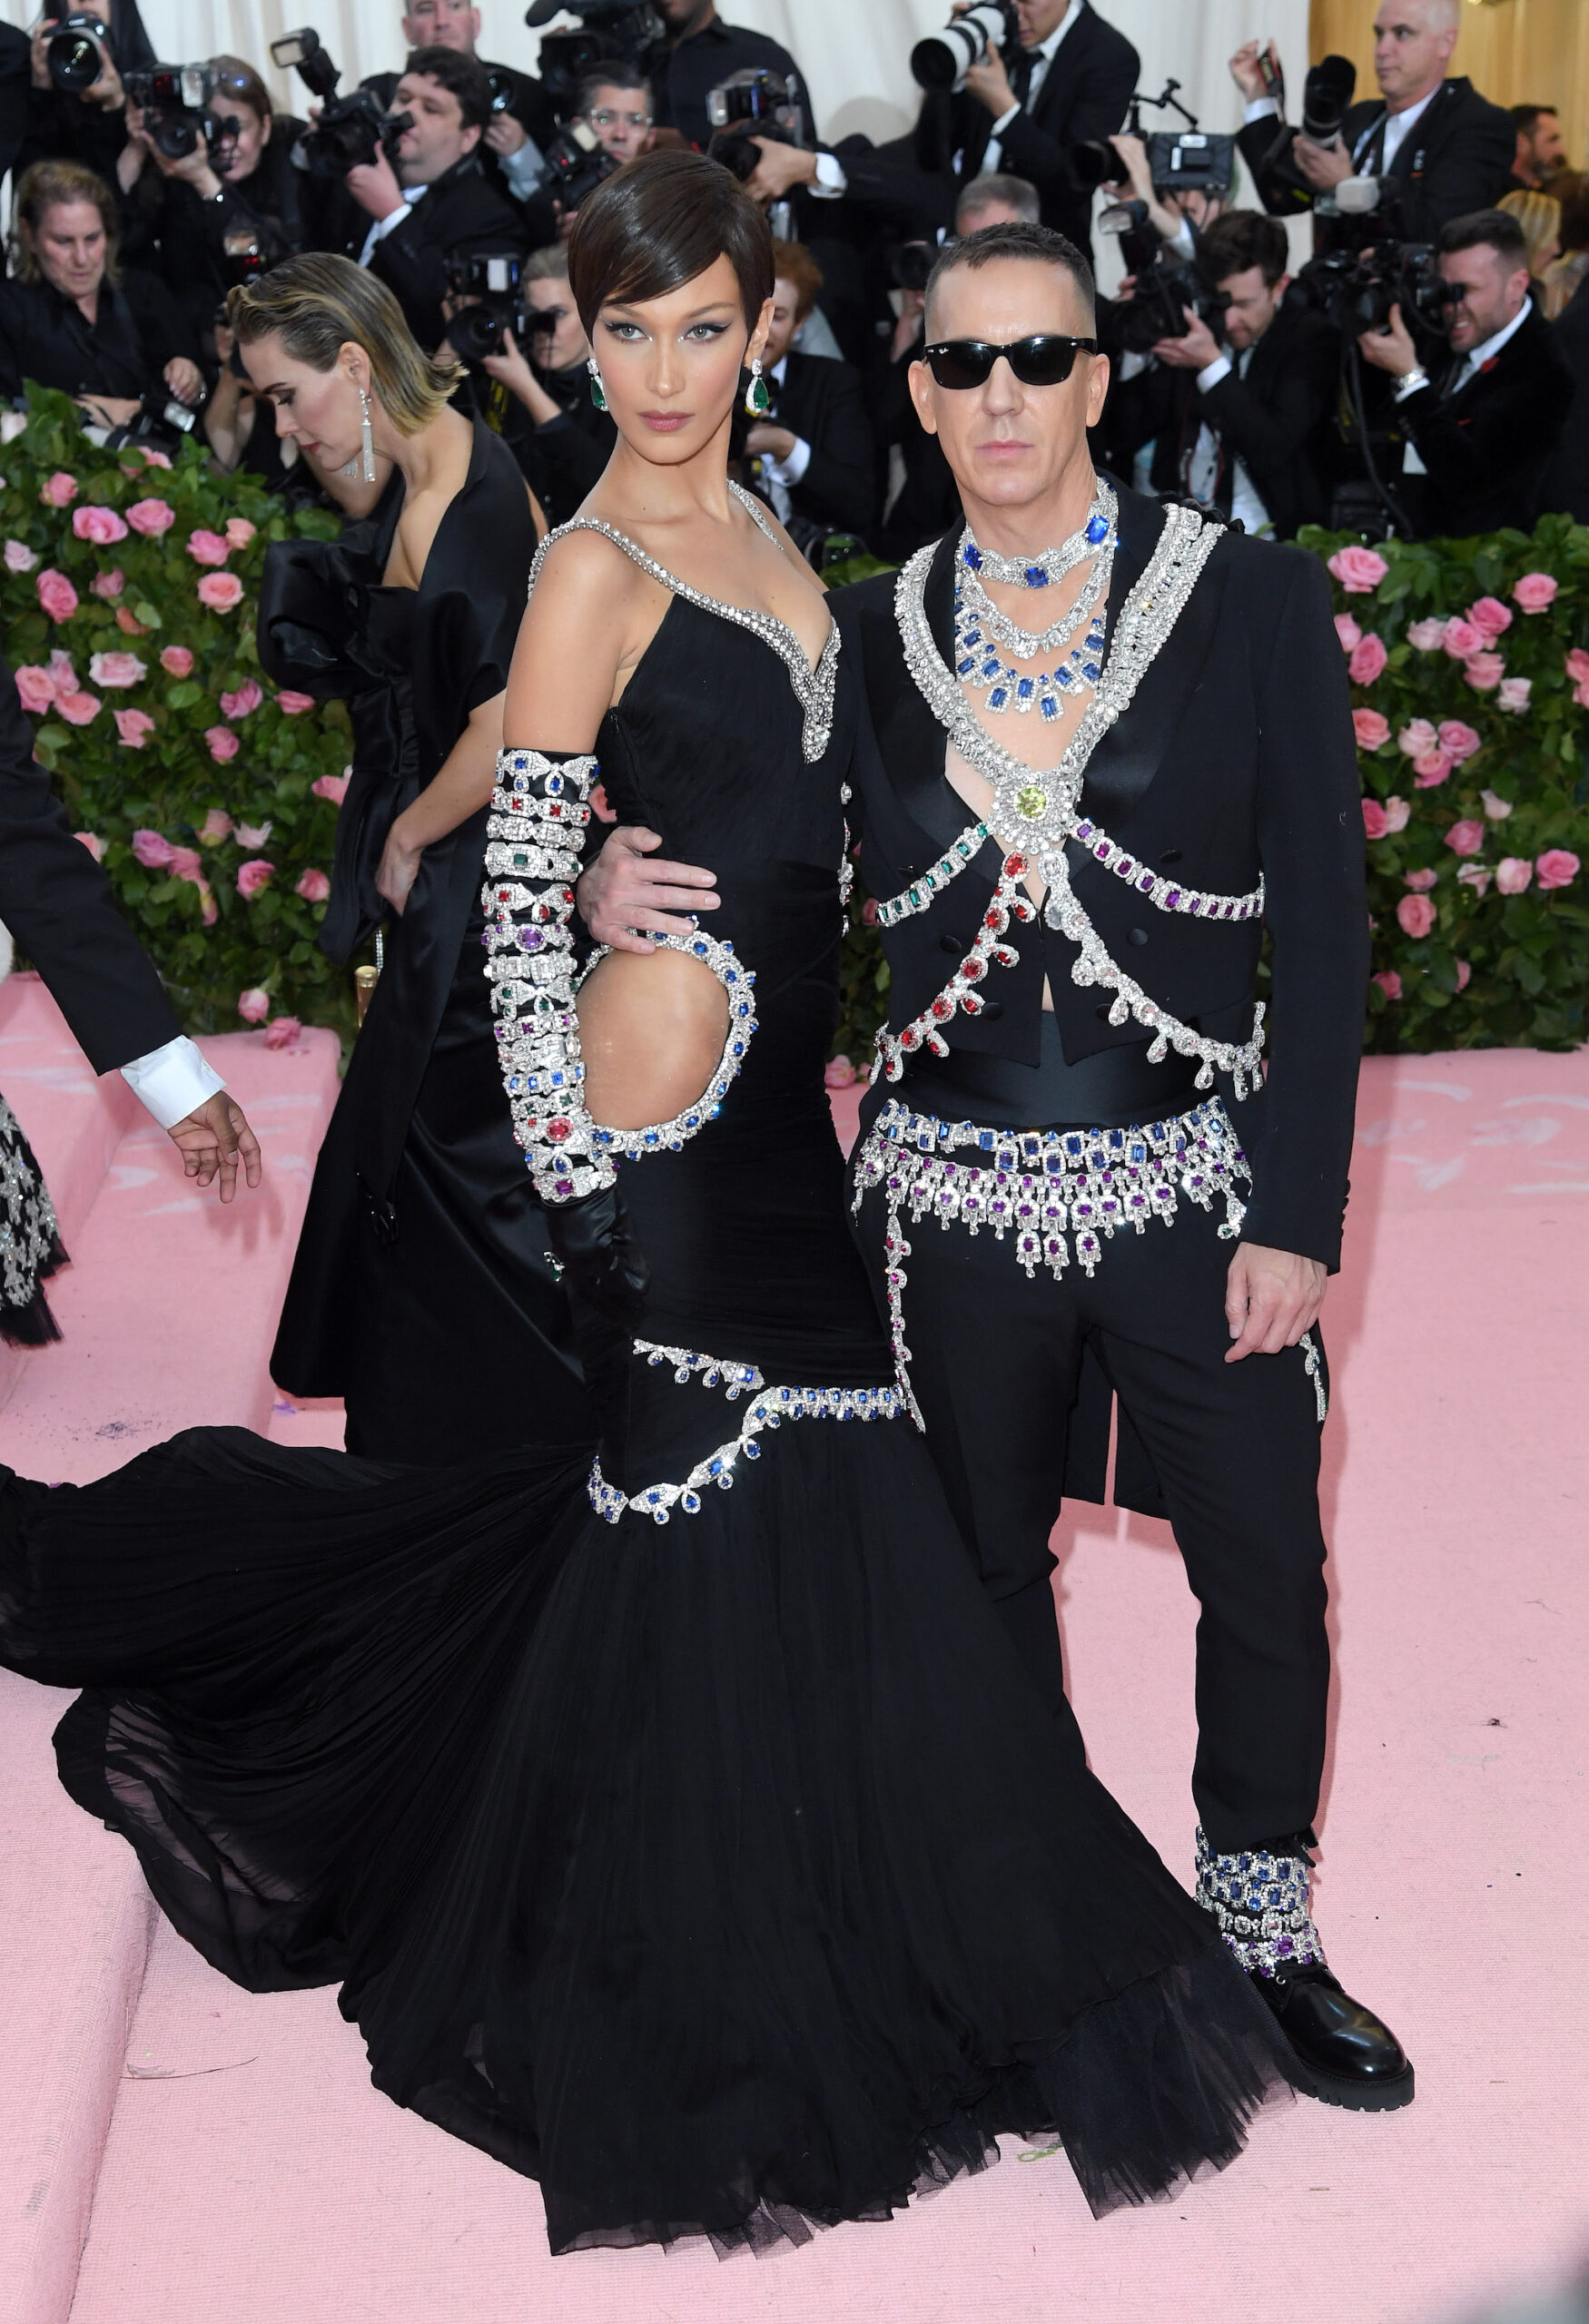  NEW YORK, NEW YORK - MAY 06: Bella Hadid and Jeremy Scott arrive for the 2019 Met Gala celebrating Camp: Notes on Fashion at The Metropolitan Museum of Art on May 06, 2019 in New York City. (Photo by Karwai Tang/Getty Images)